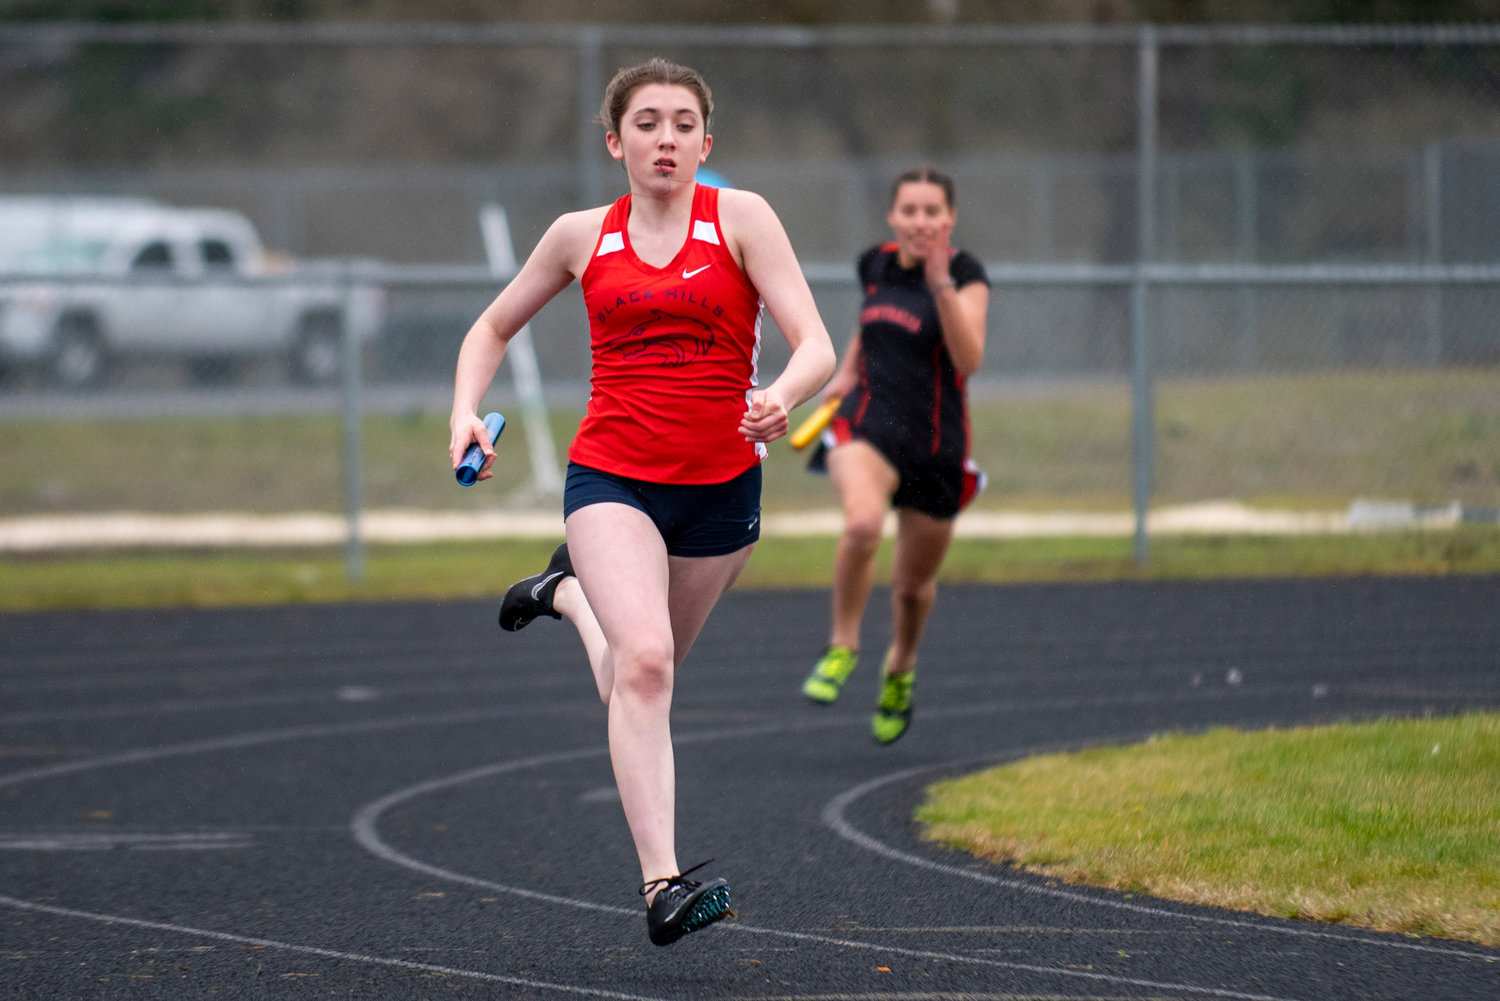 Black Hills' Kiley McMahon sprints during the Wolves' third leg of the 4x200-meter relay against Centralia on March 17 at Rochester High School.